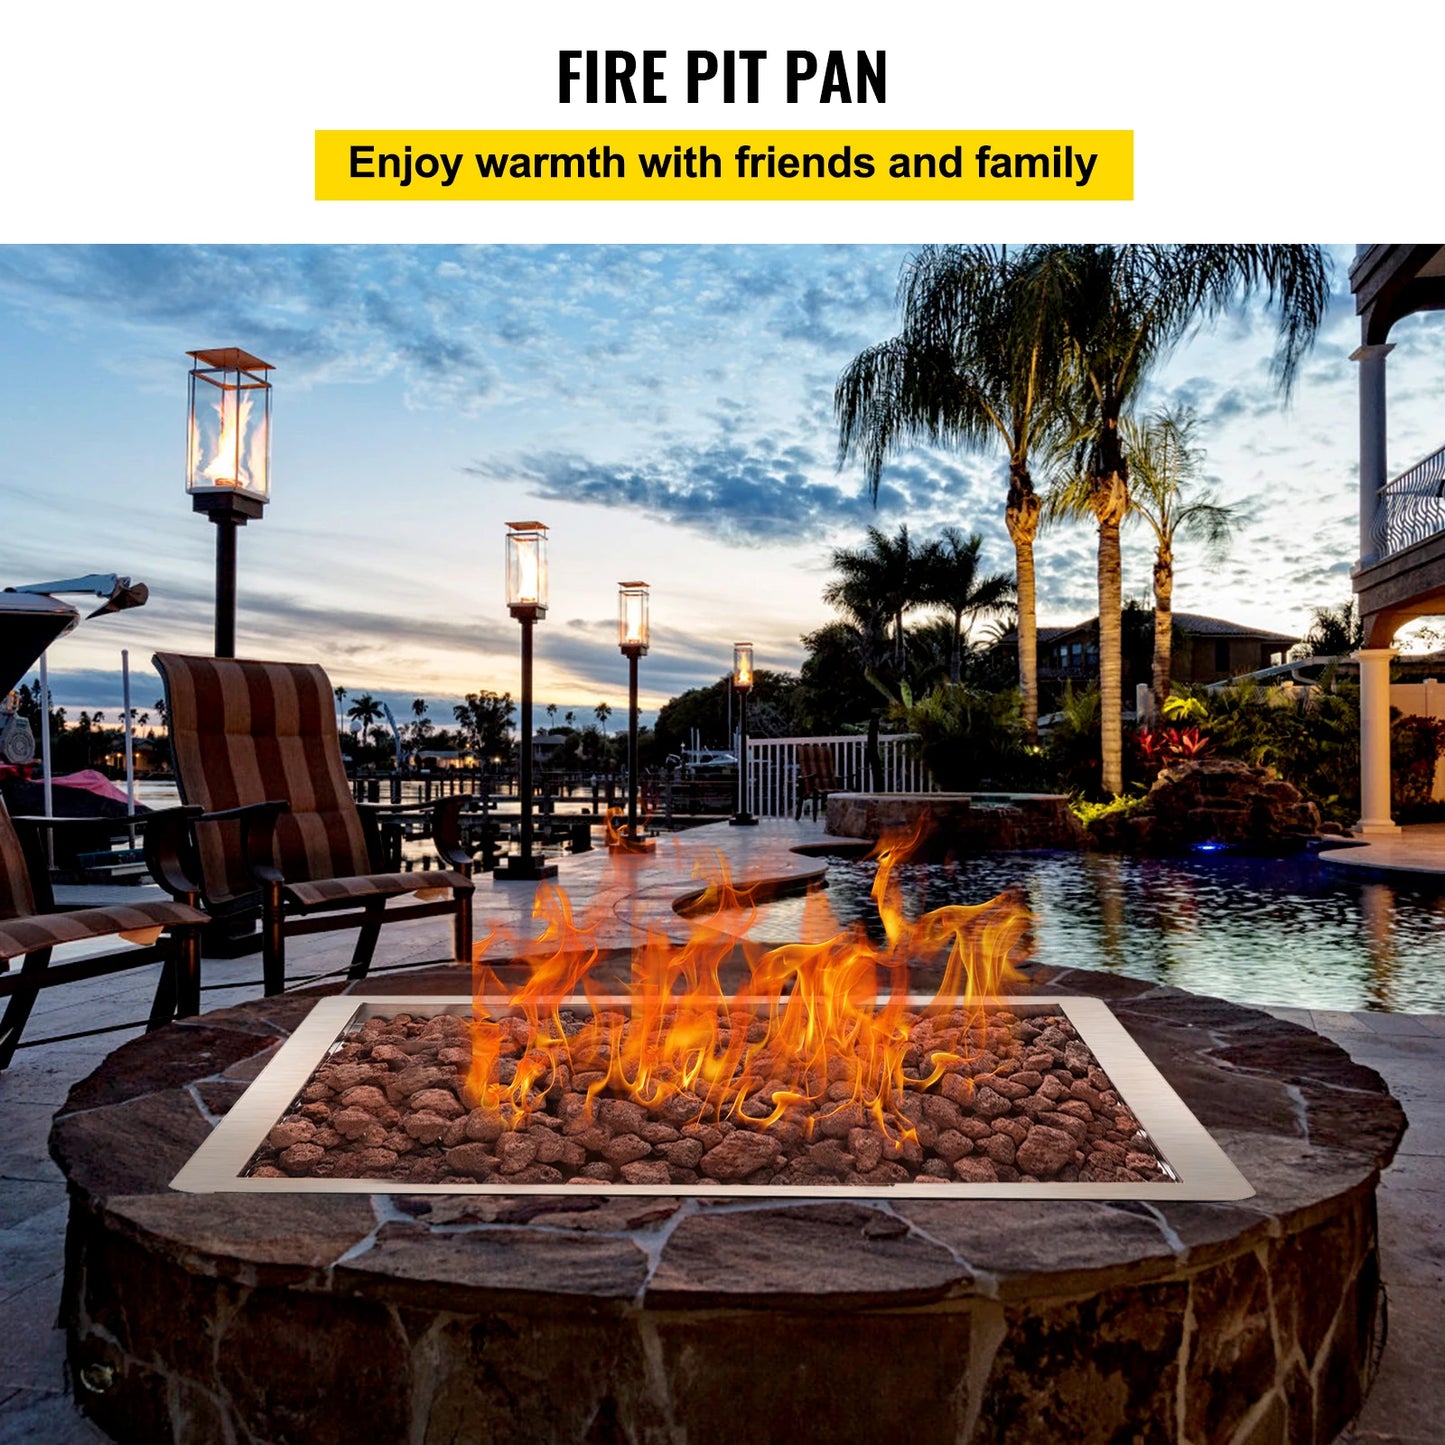 VEVOR Drop in Fire Pit Pan Gas Plate 18X18/36x36 Stainless Steel Big Combustion Area for DIY in Backyard